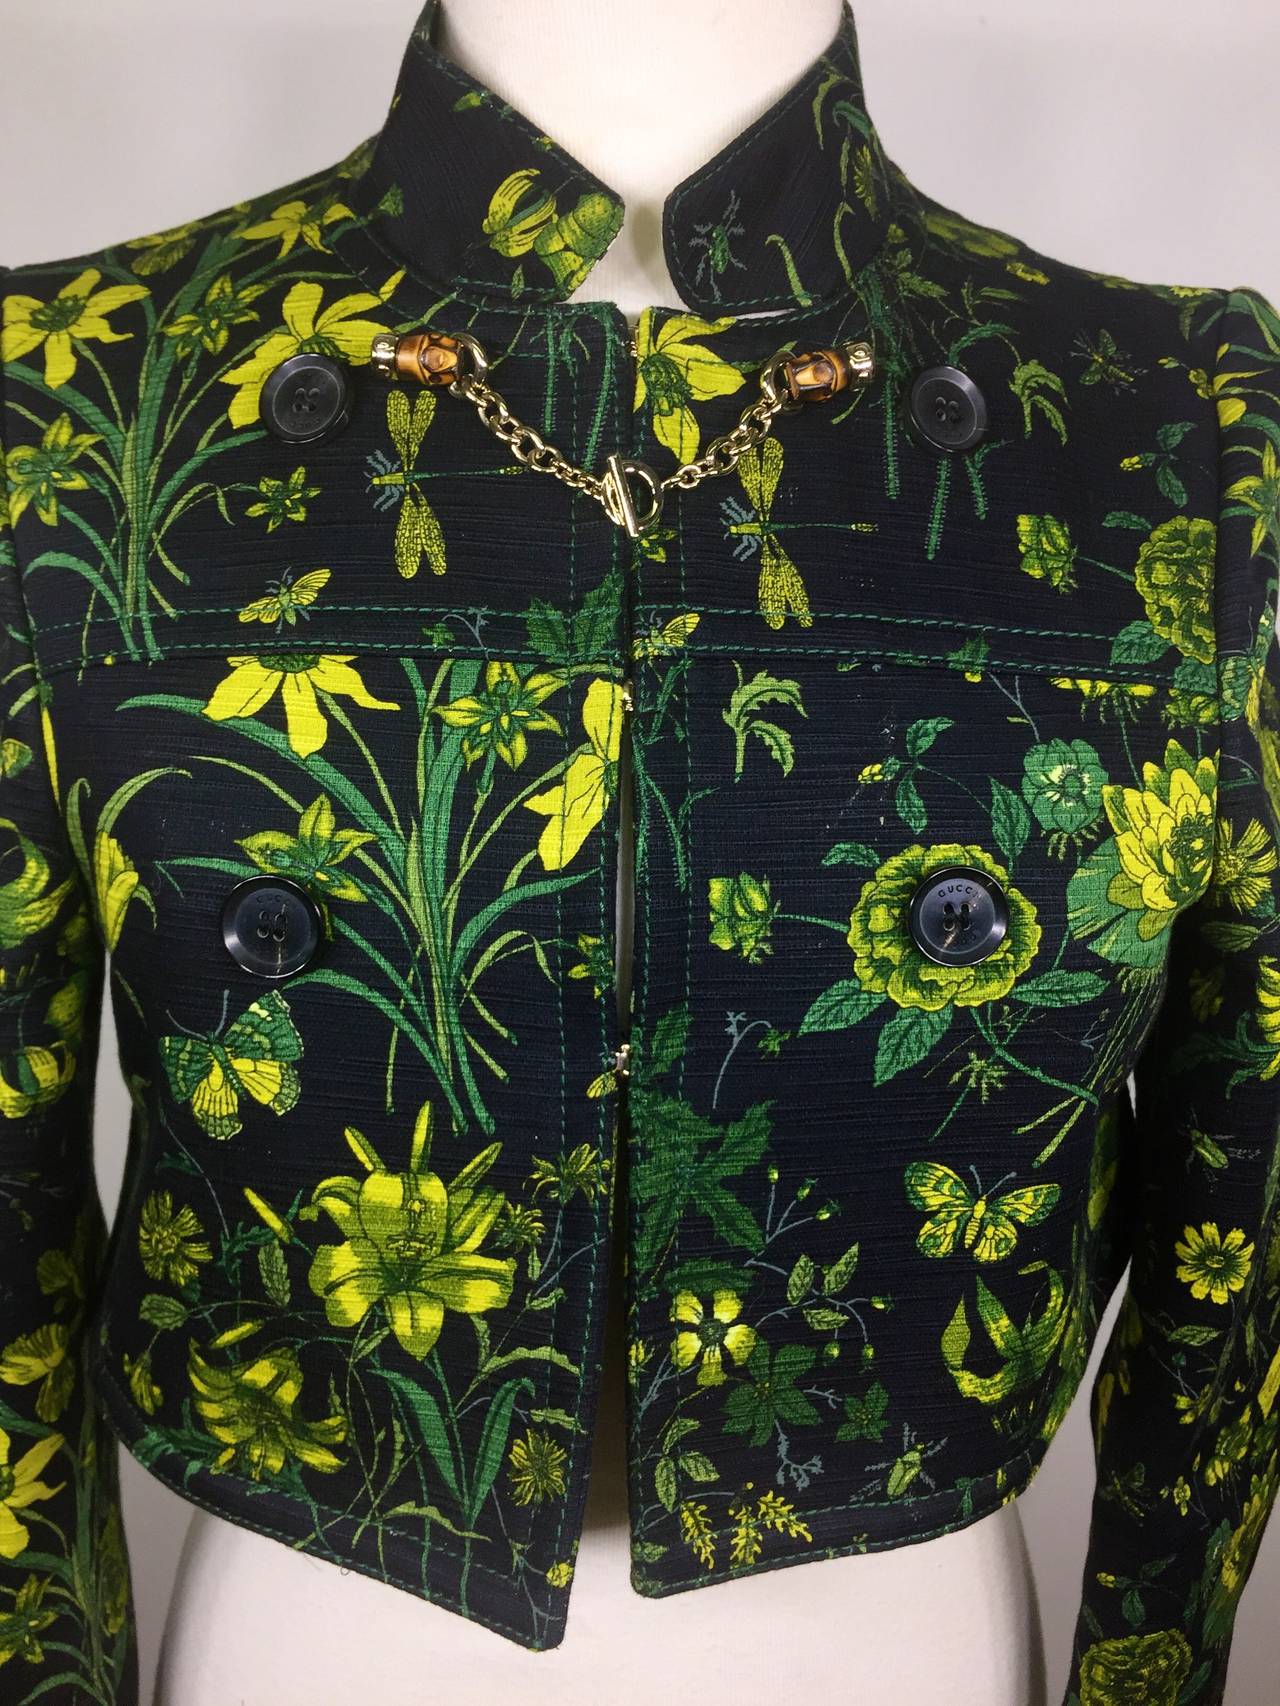 This is a gorgeous Gucci Floral black and green crop jacket
Bamboo toggle detail
Size 38
Measurements:
Length 14